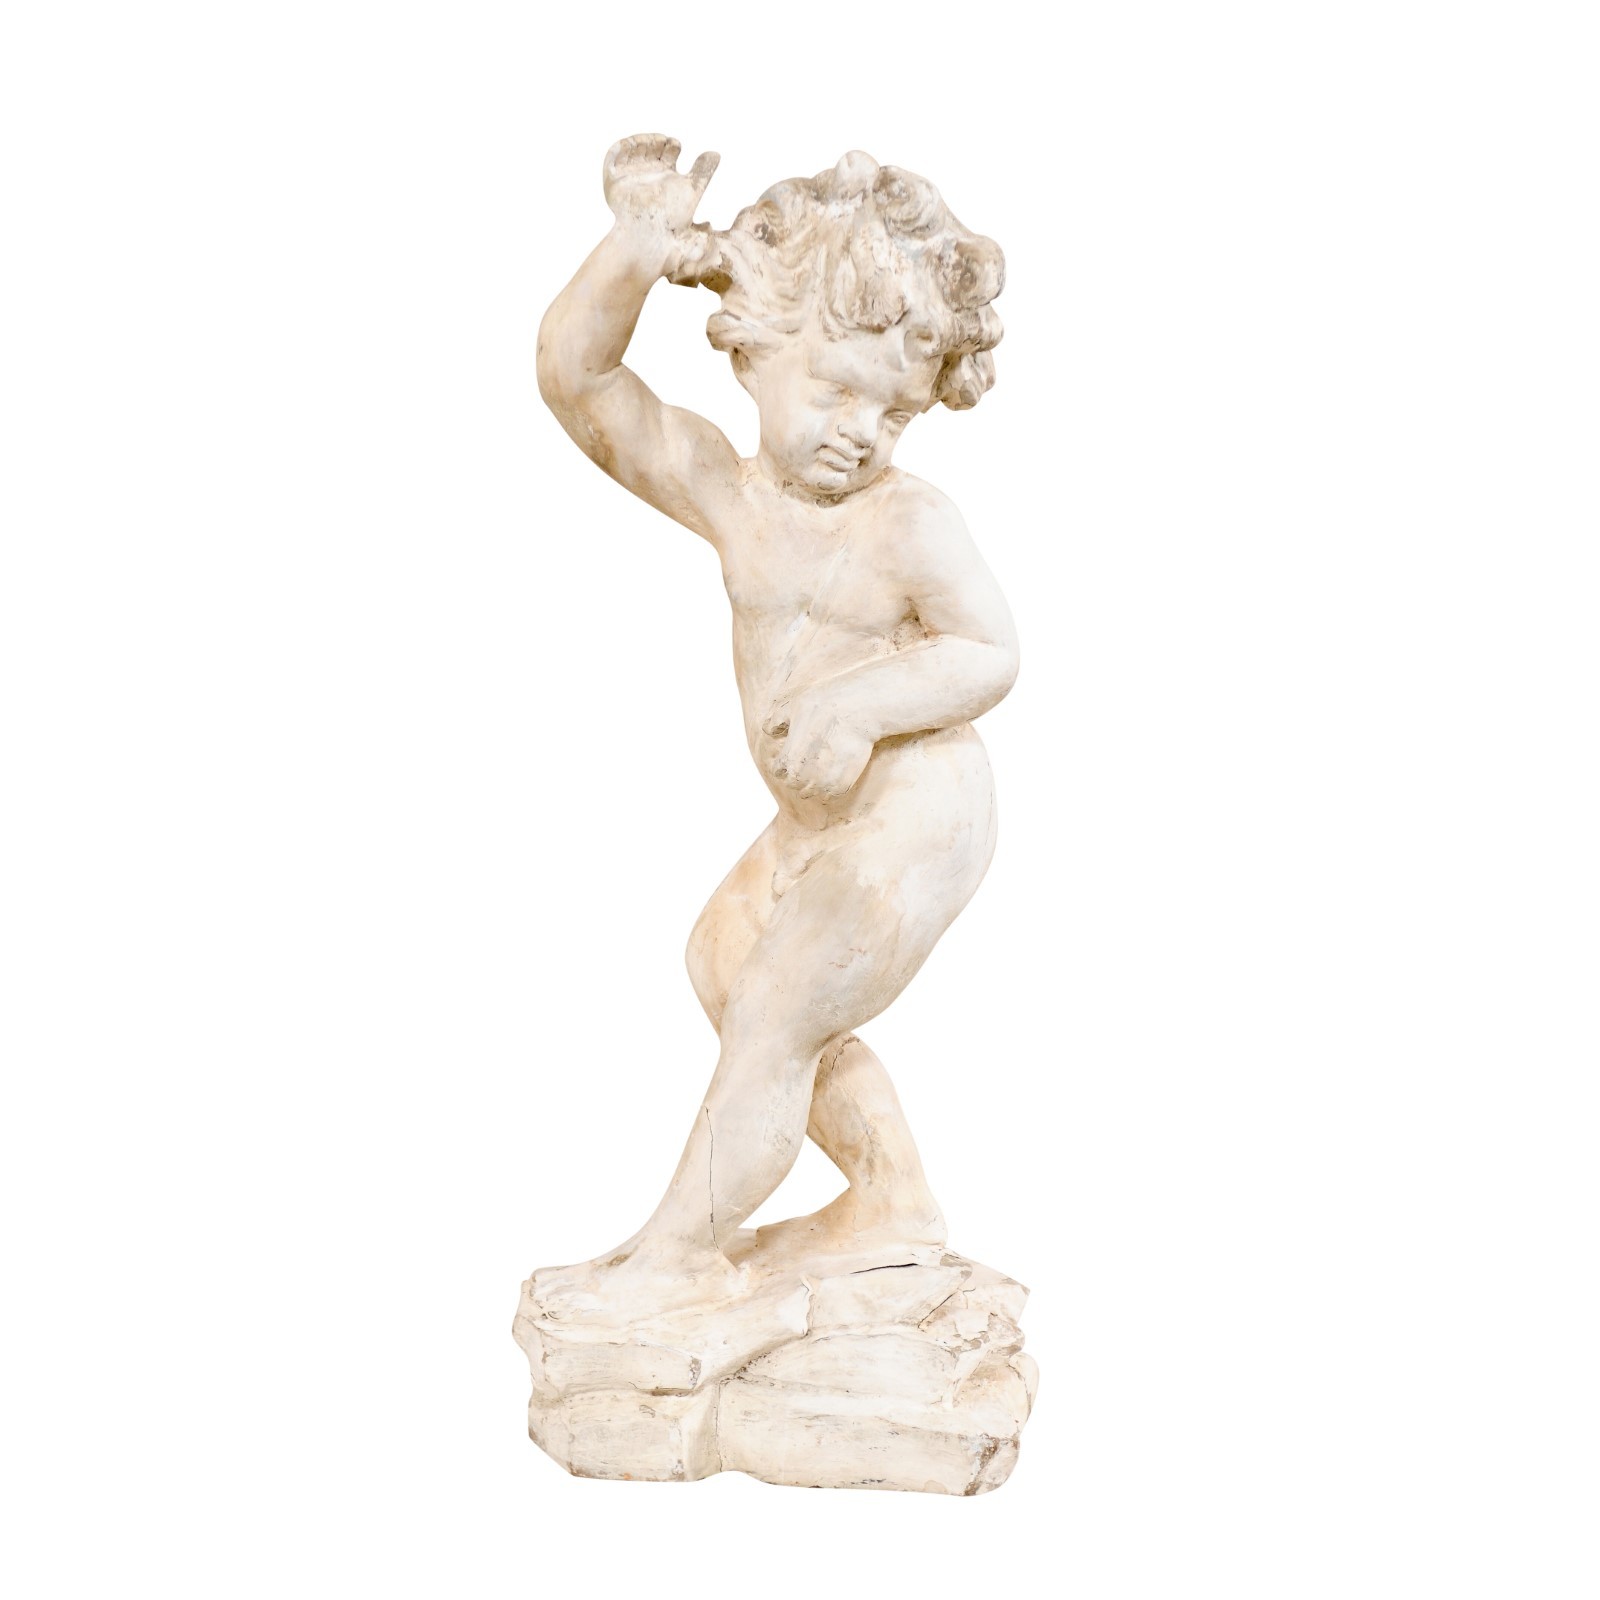 An Italian Hand-Carved Putto Figure, 30"H